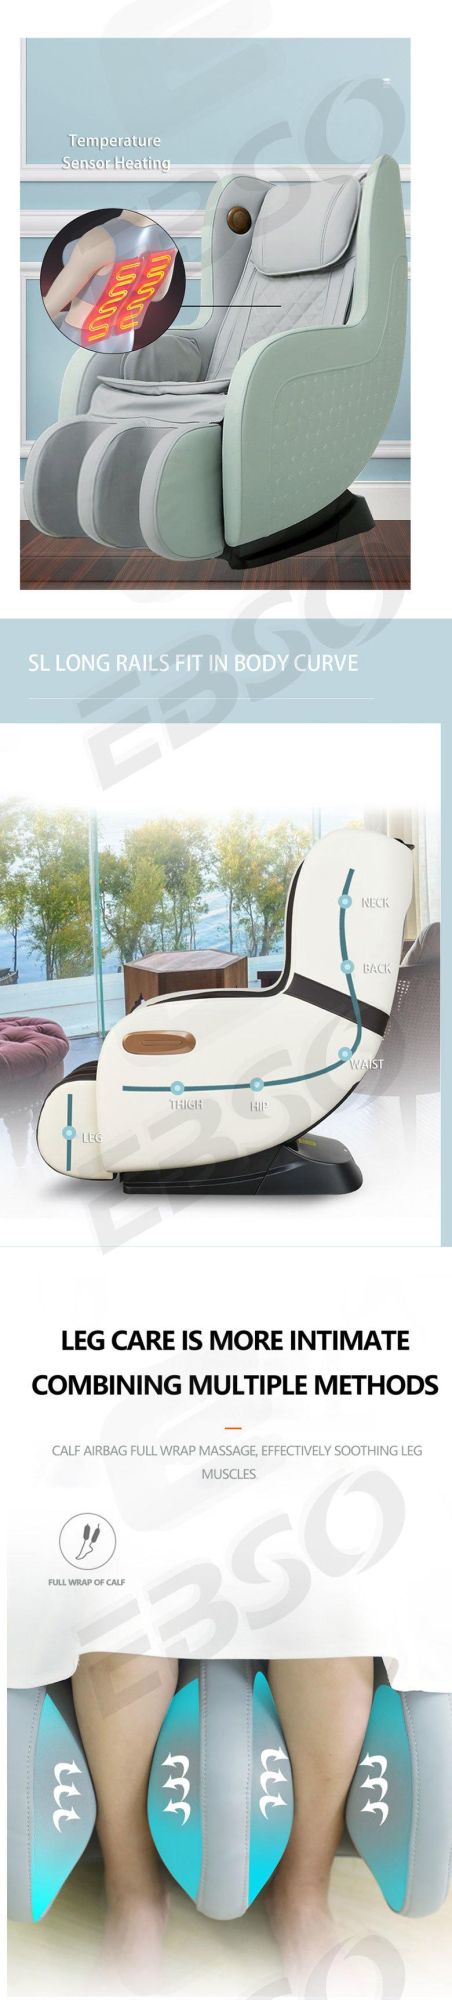 Intelligent 3D Electric Massage Chair for Full Body with SL Track Luxury Leisure Equipment